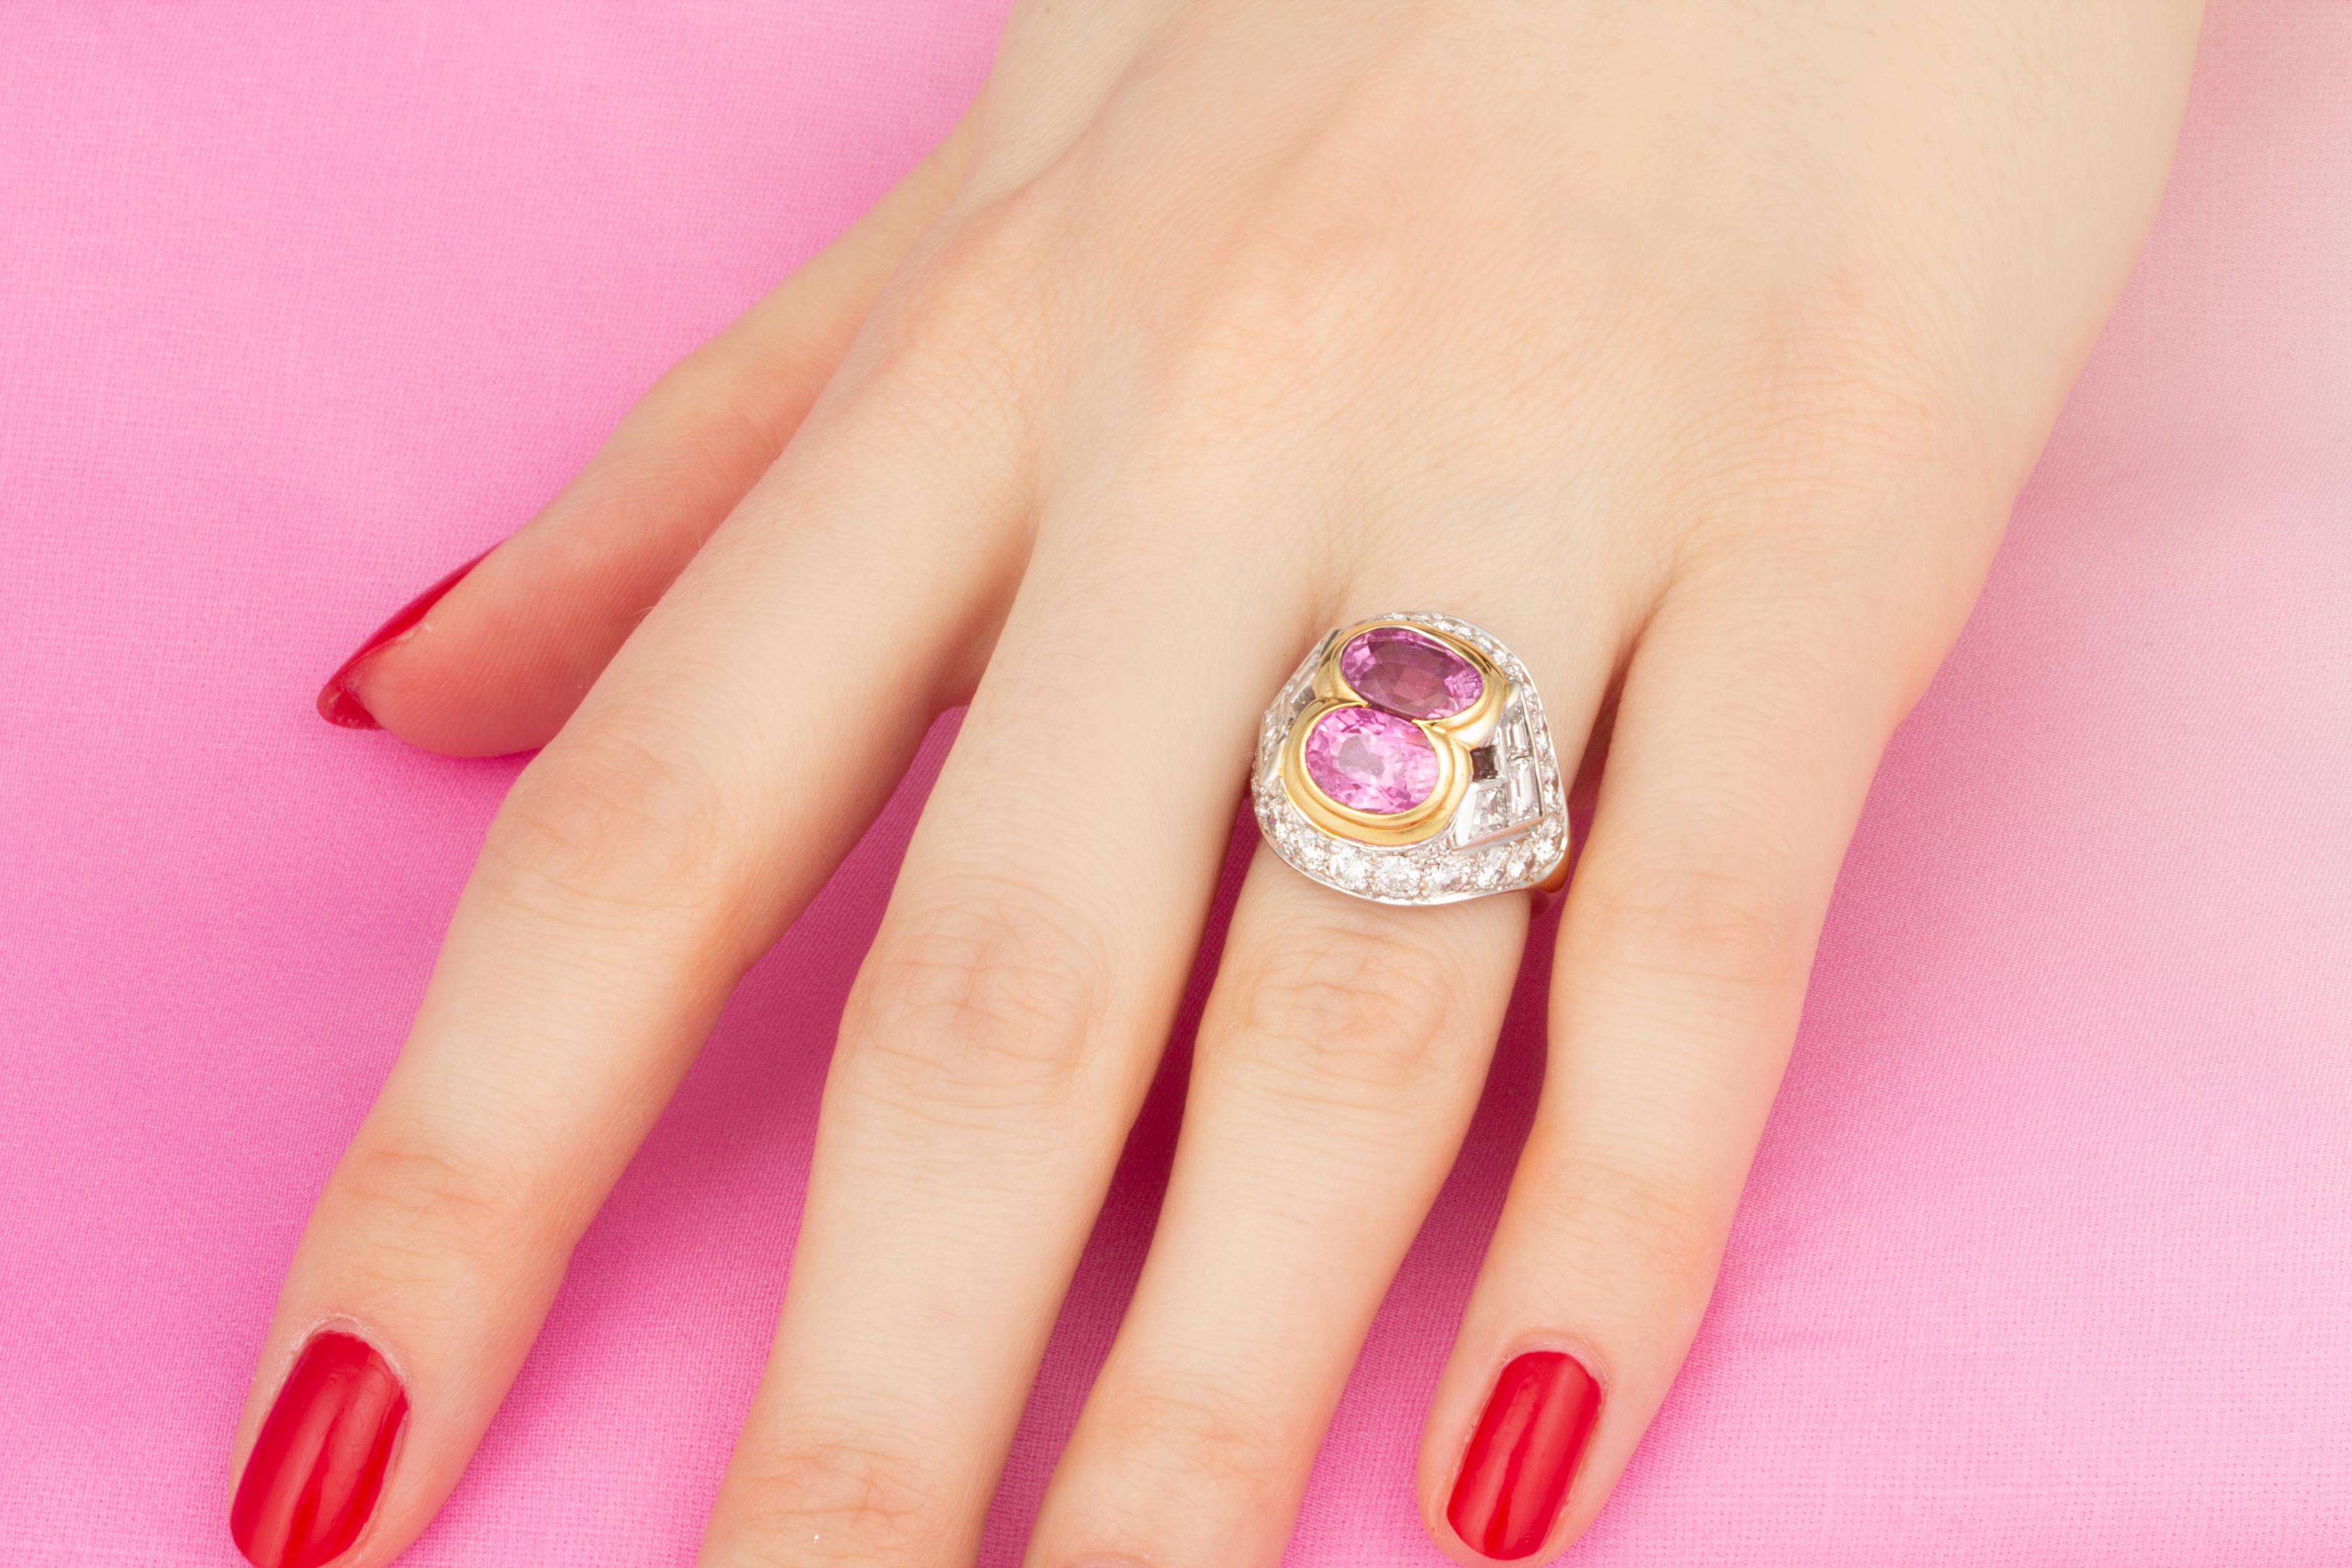 The ring features 2 faceted oval-cut pink sapphires of brilliant color (4.35 carats total) flanked by 1.80 carats of custom-cut baguette diamonds. The design is complete with 1.18 carats of round diamonds. All our diamonds are of top quality